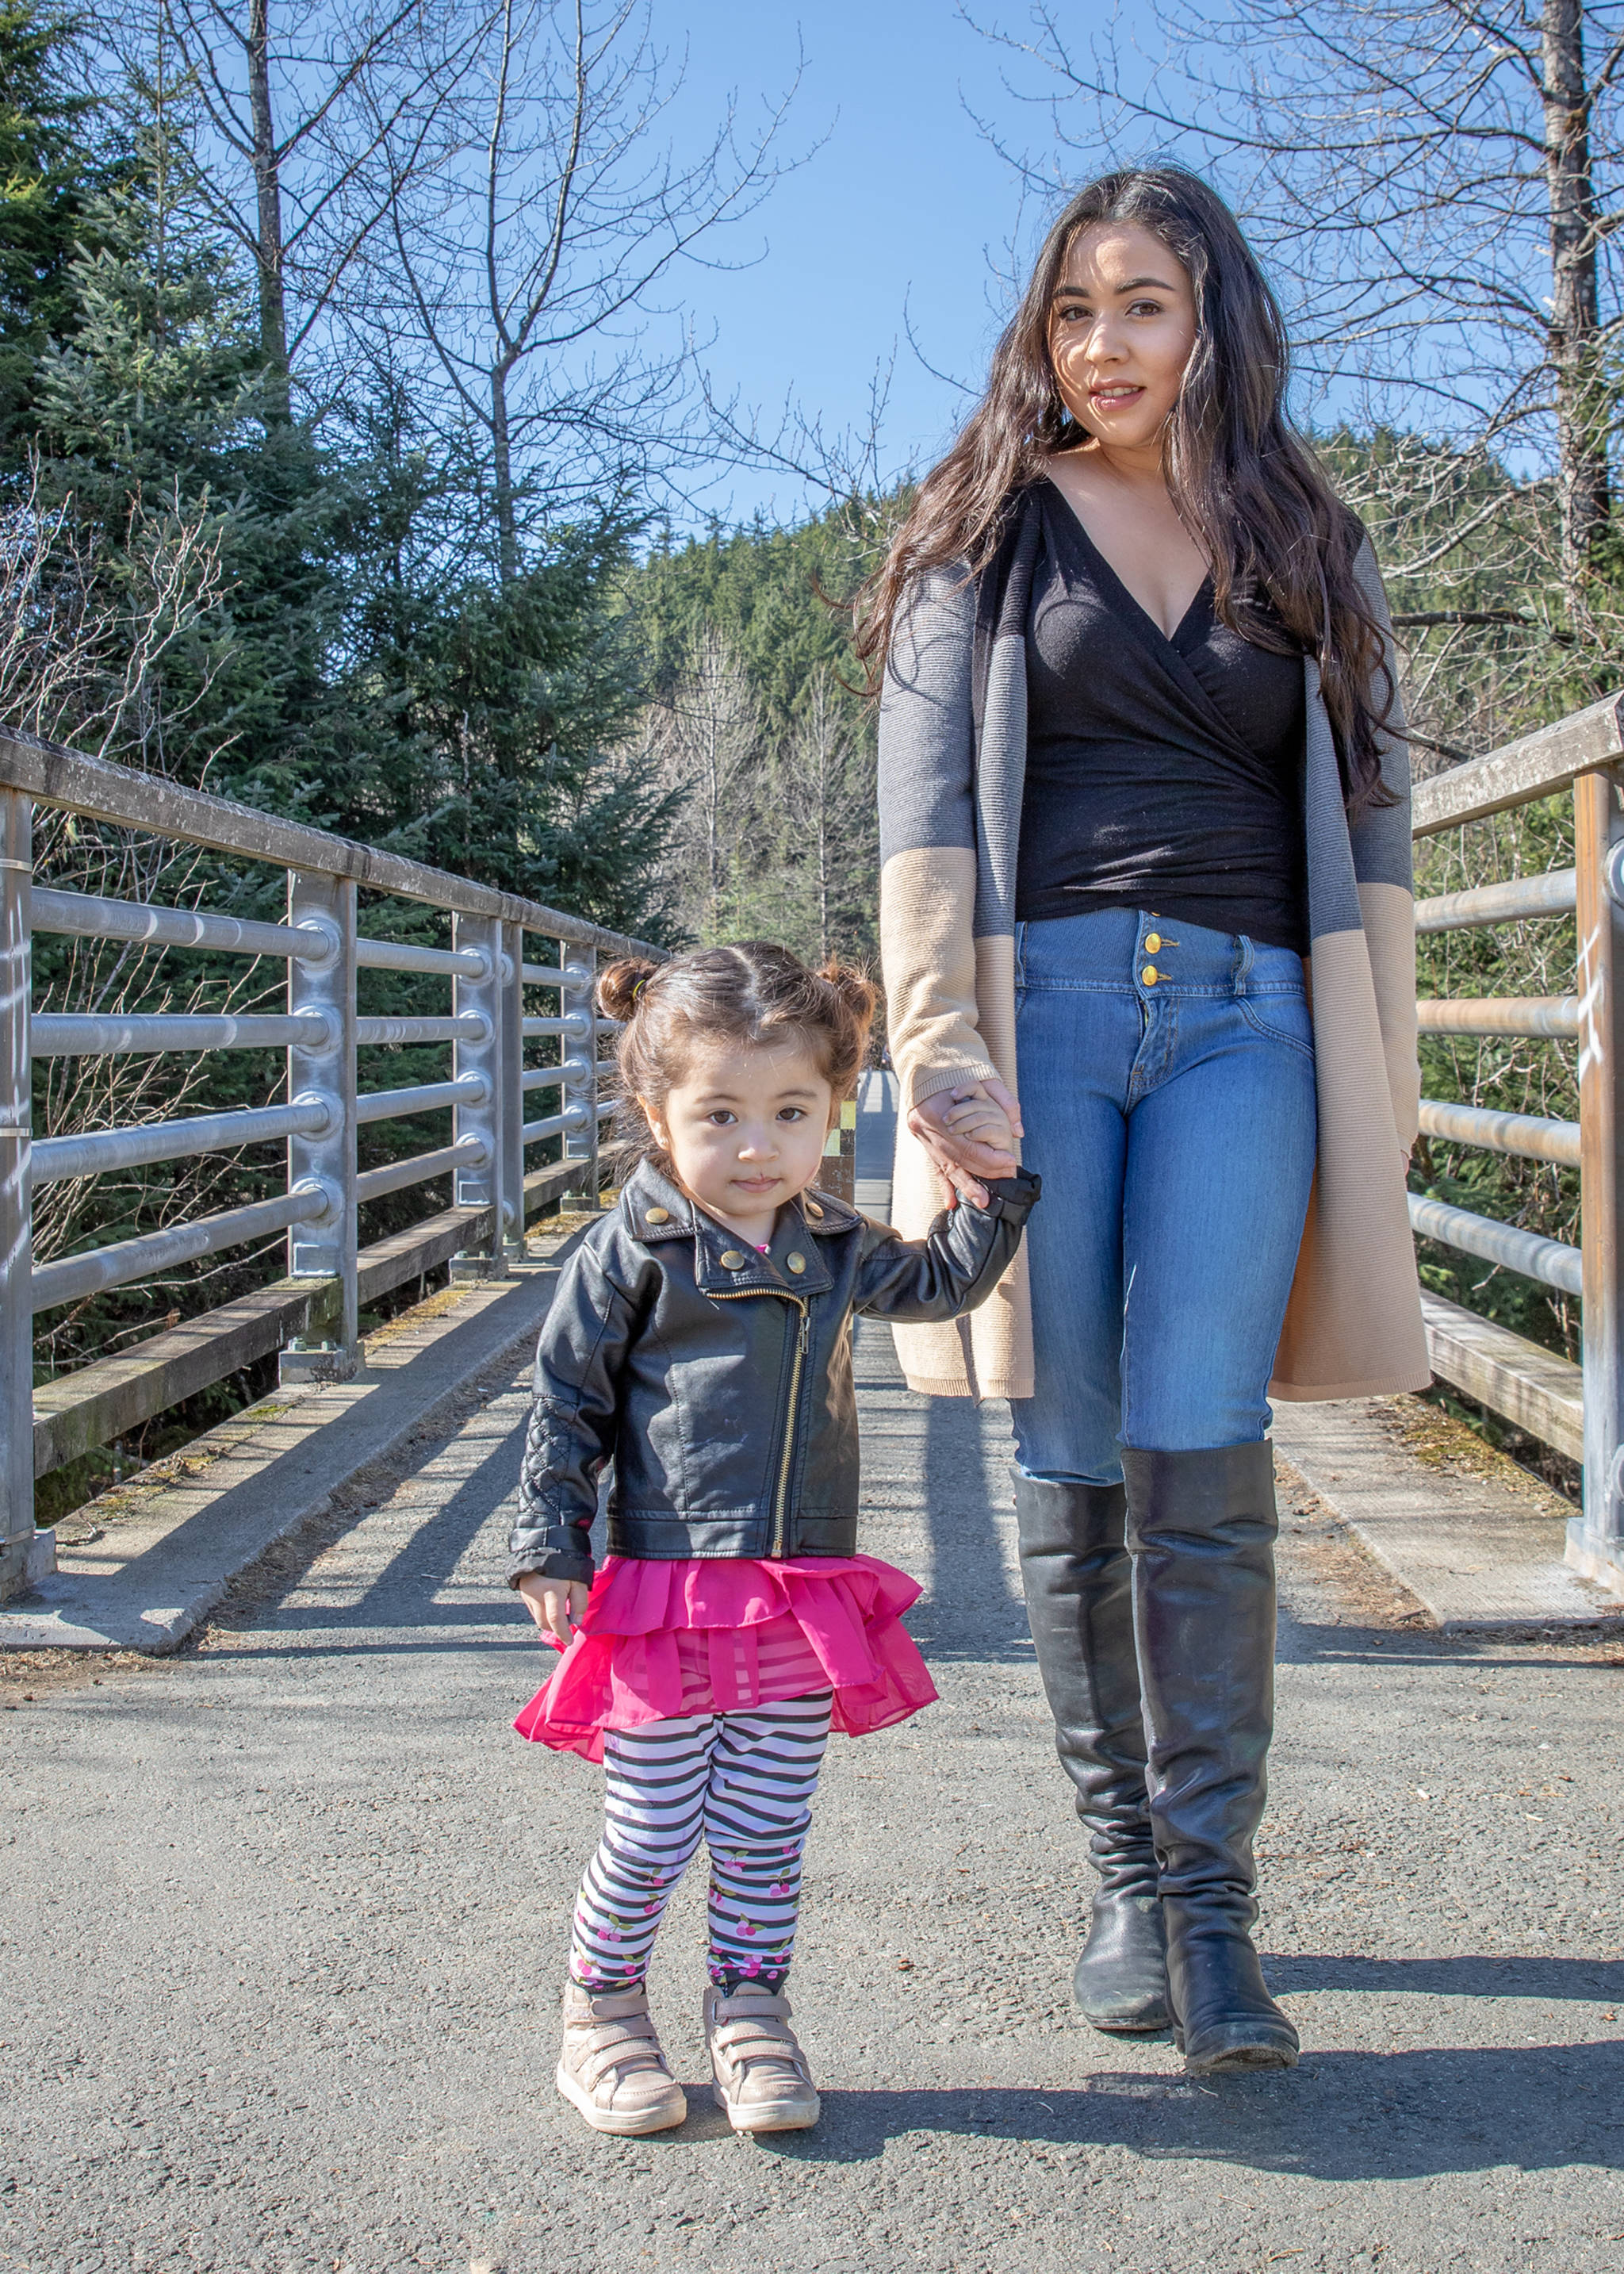 March 31, 2019: Everyone enjoys a walk on a sunny day, and Michelle Cabrera and her daughter Ariana do so in style. Michelle is wearing an Anne Klein cardigan over a Banana Republic top and Style & Co jeans, with black leather Vince Camuto boots. Ariana couldn’t be cuter in her outfit from Juicy Couture topped by a black leather jacket.